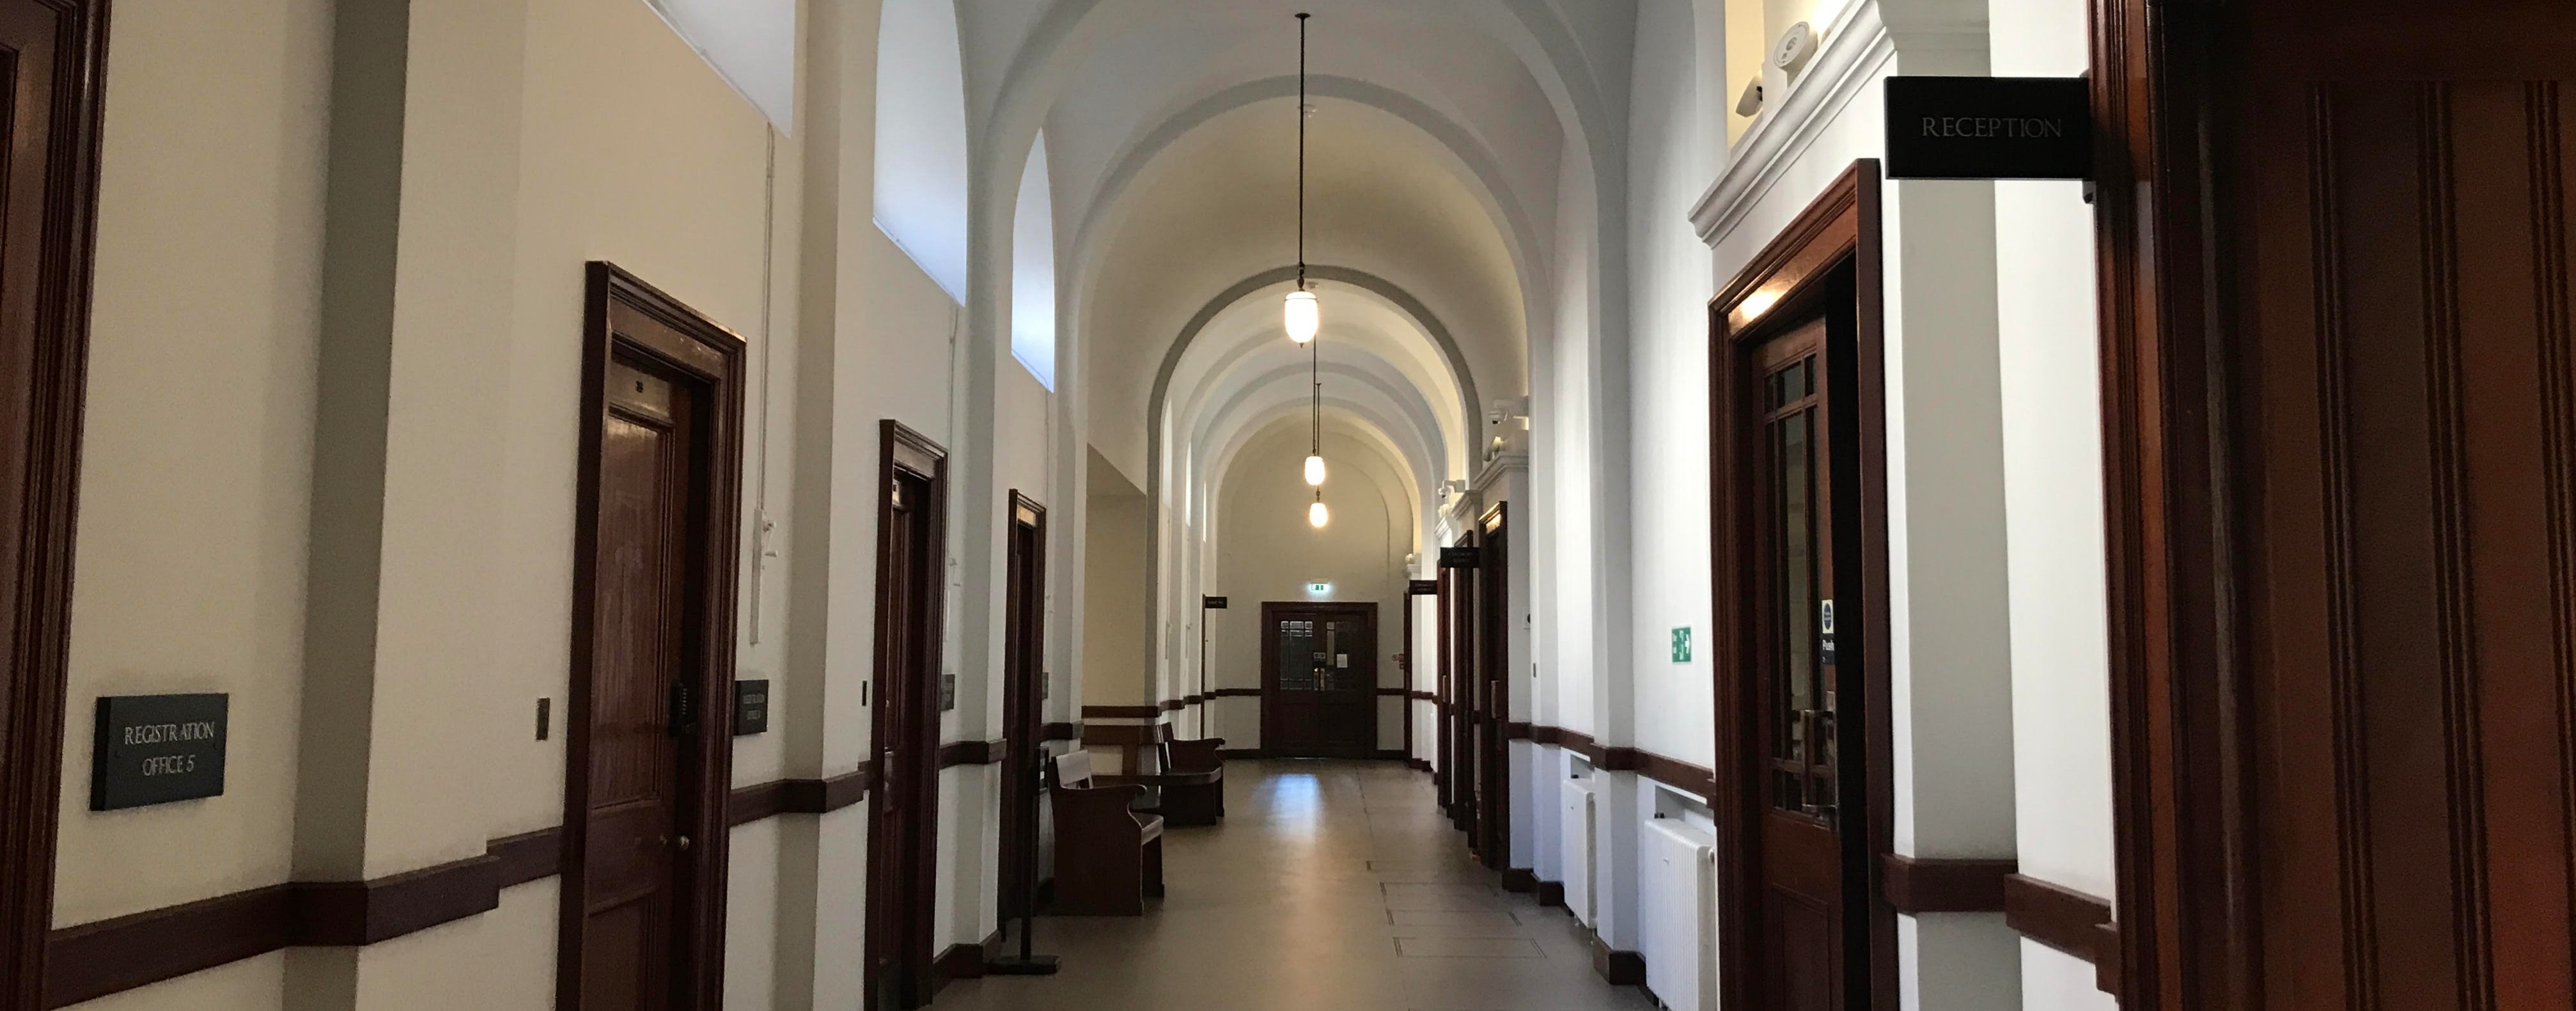 Corridor in the old court house